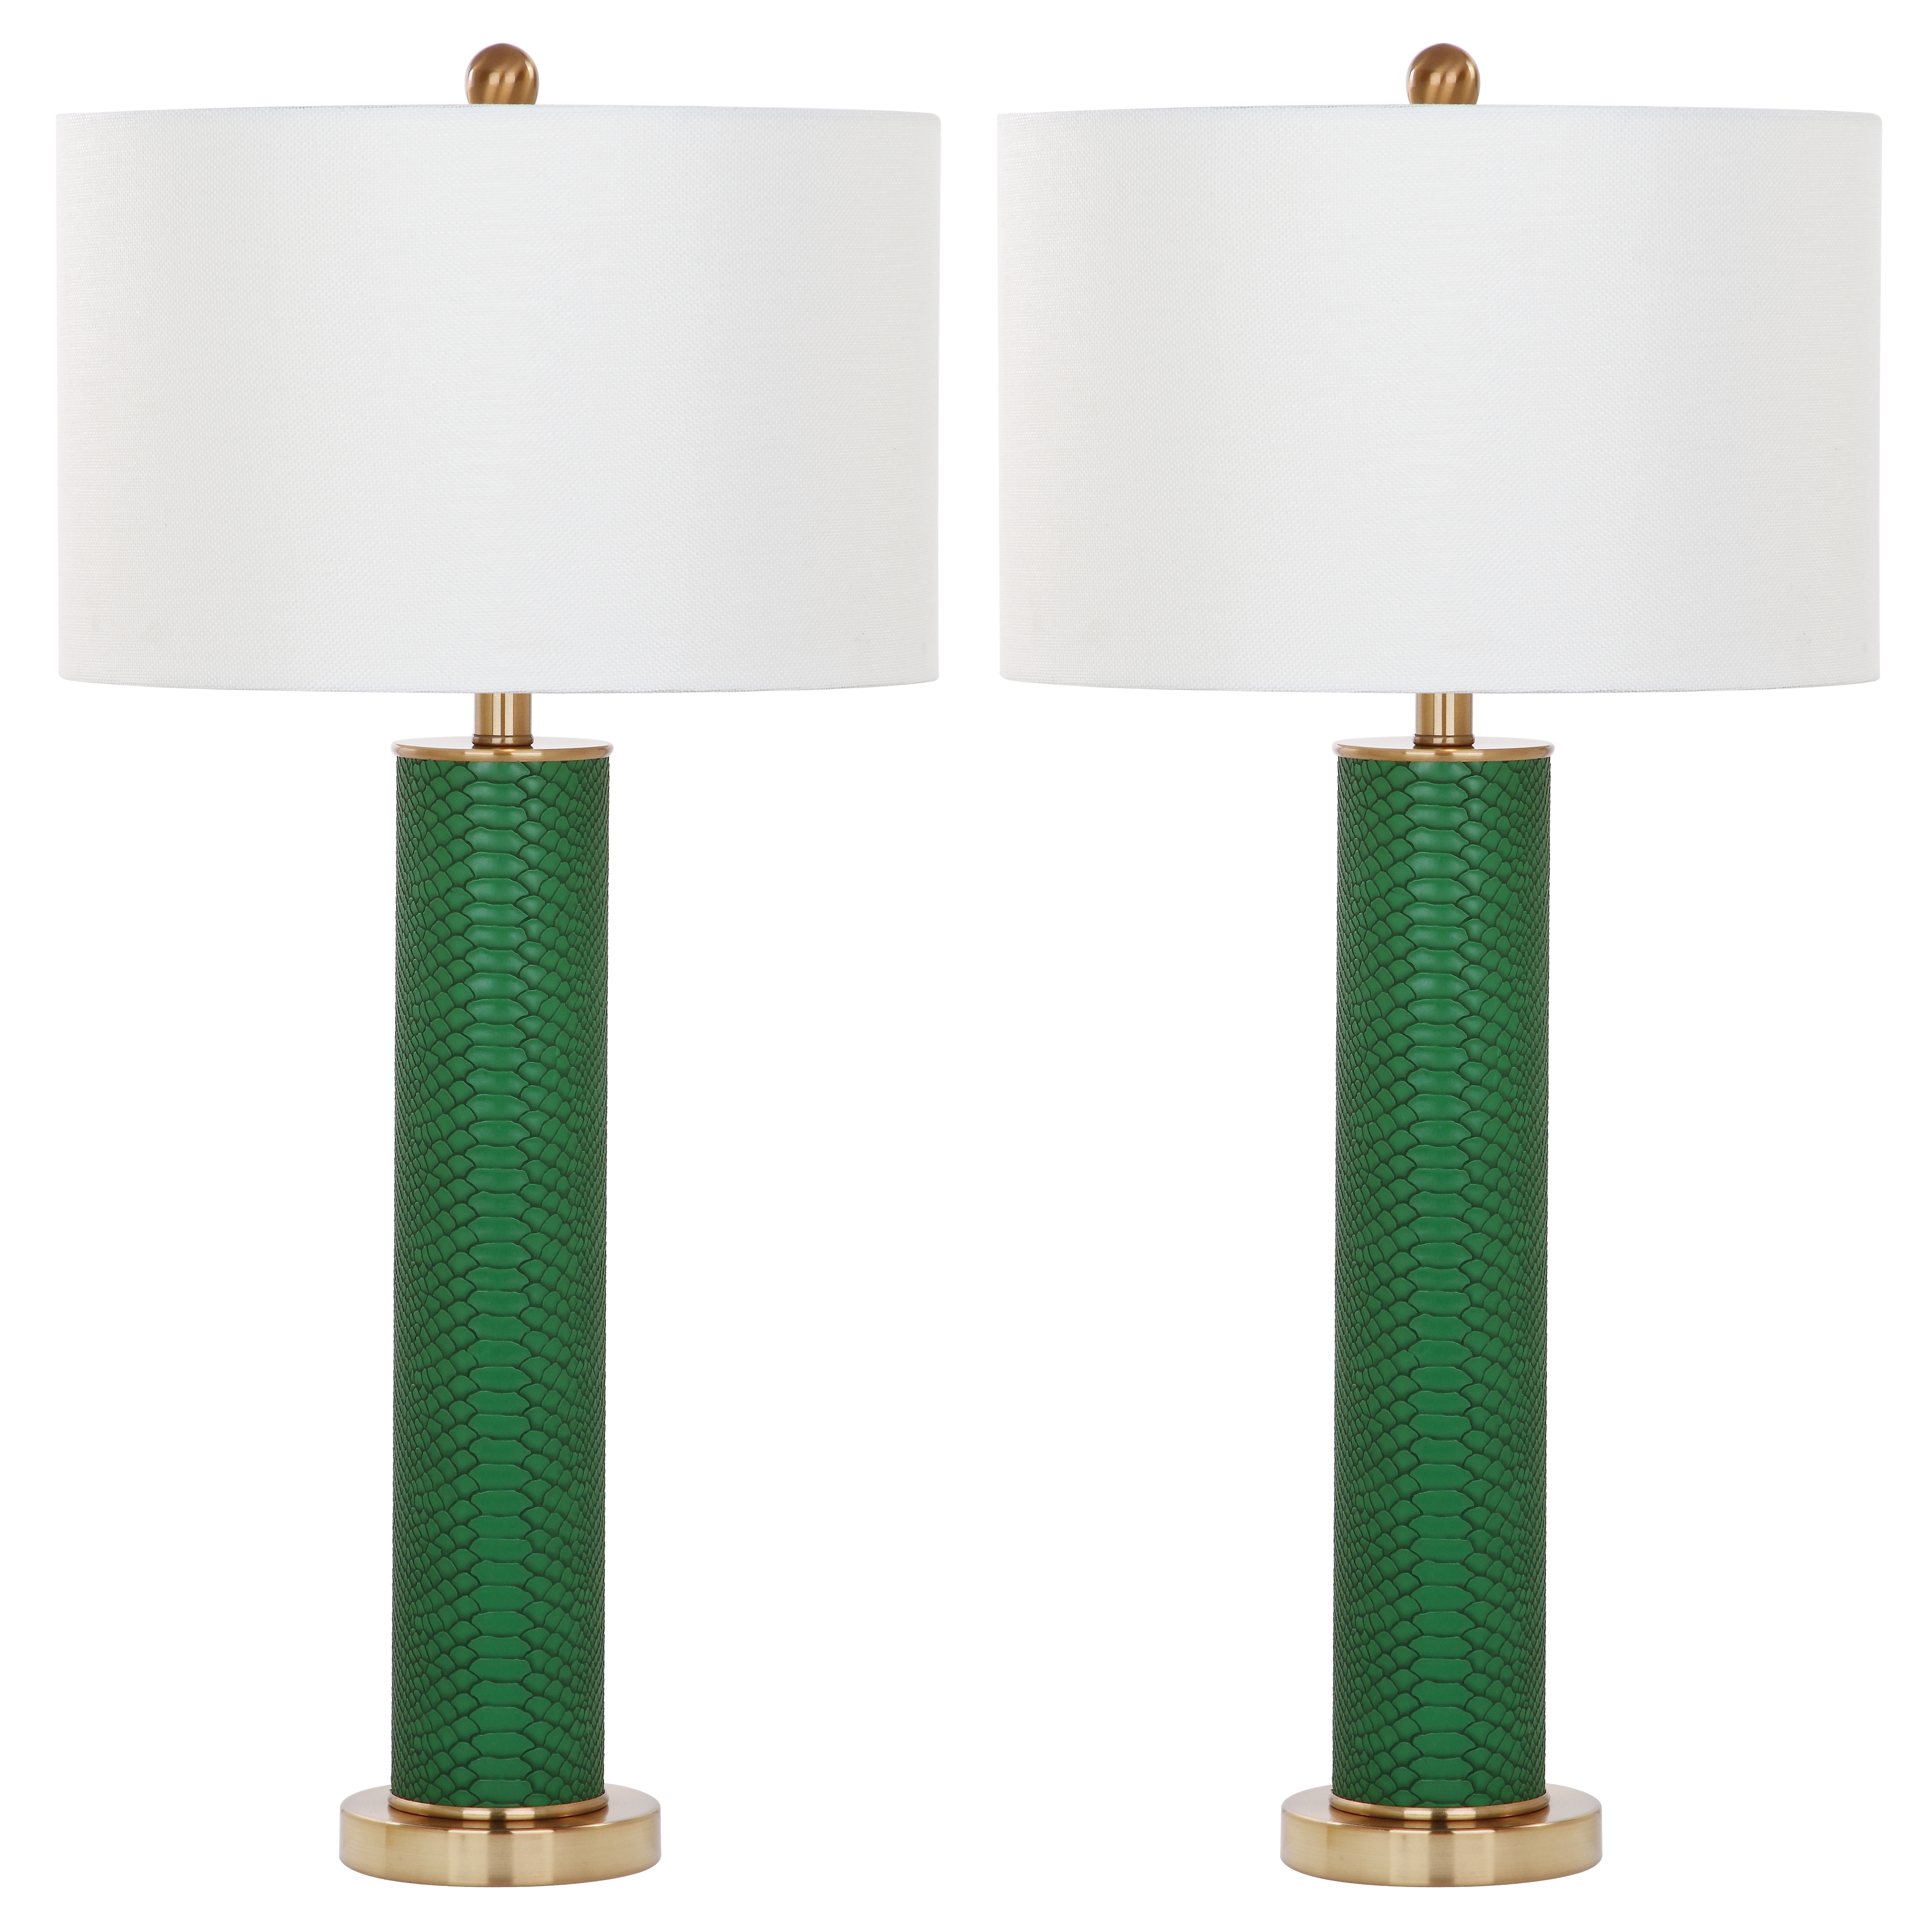 Ollie 31.5-Inch H Faux Snakeskin Table Lamp - Dark Green - Arlo Home - Image 0